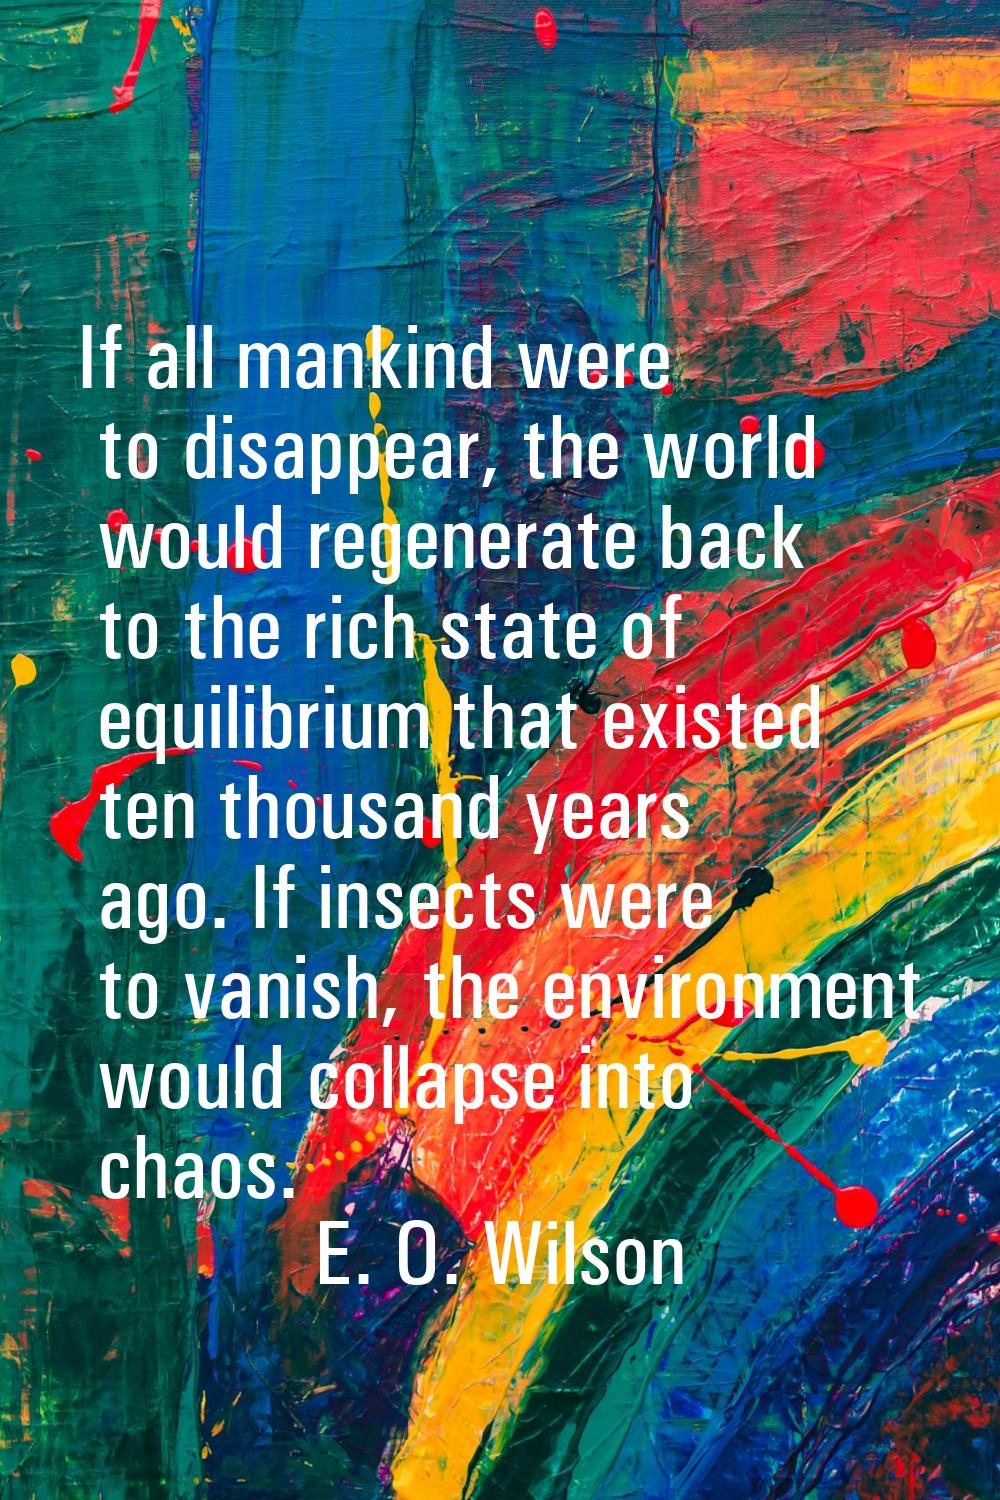 If all mankind were to disappear, the world would regenerate back to the rich state of equilibrium 